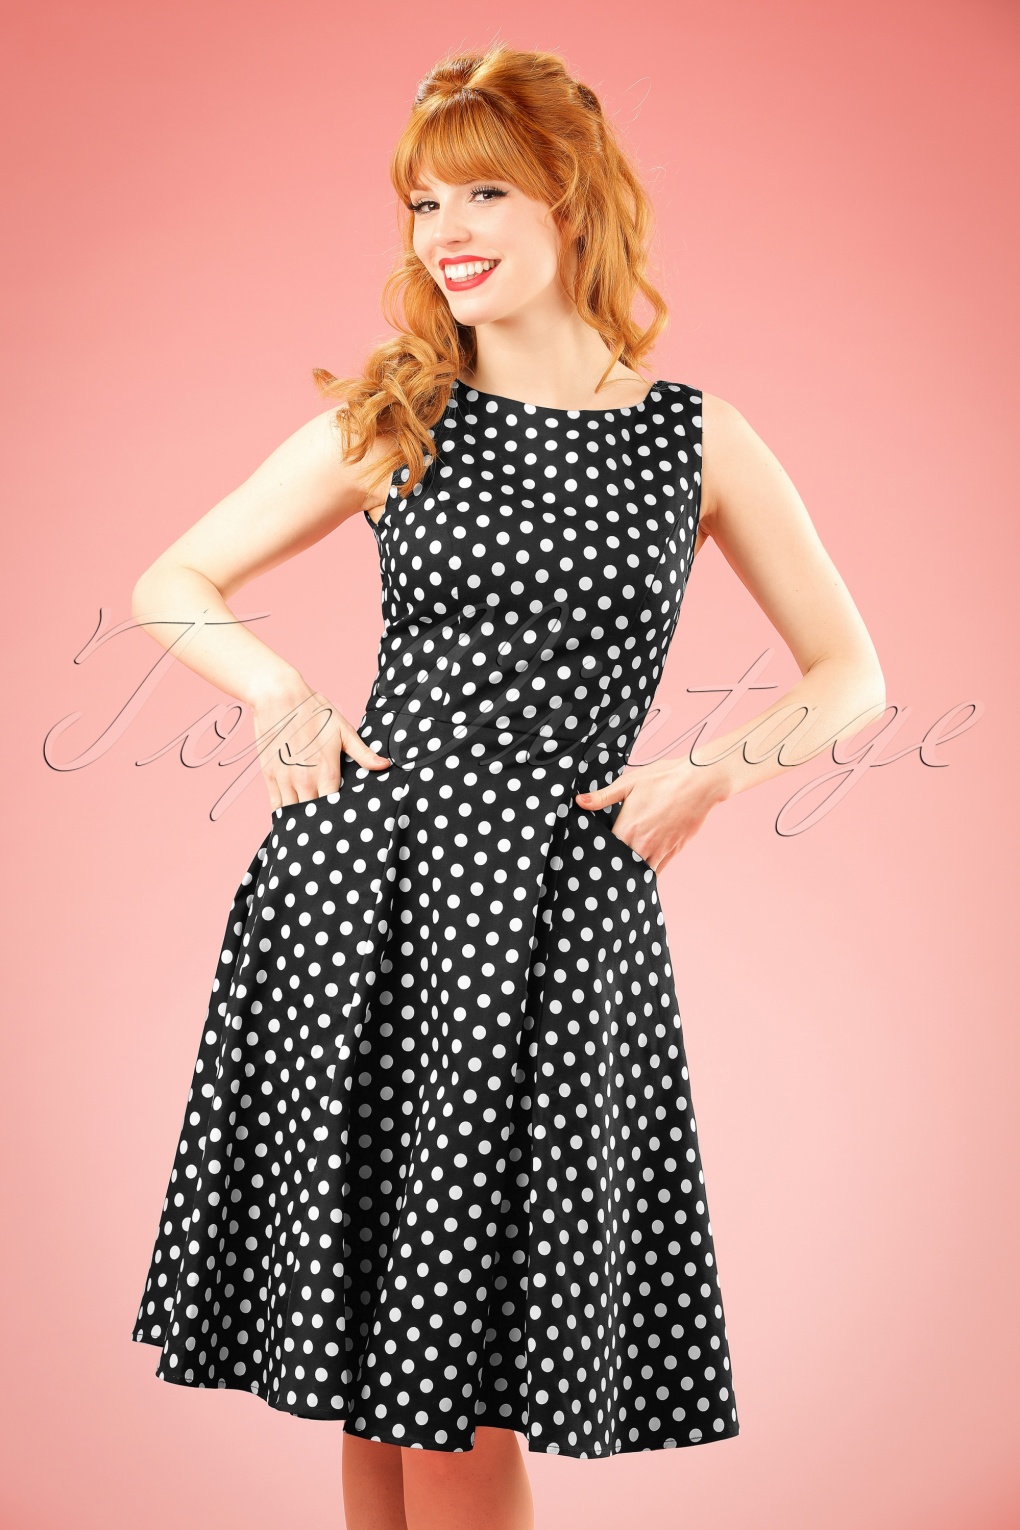 black and white polka dot gown